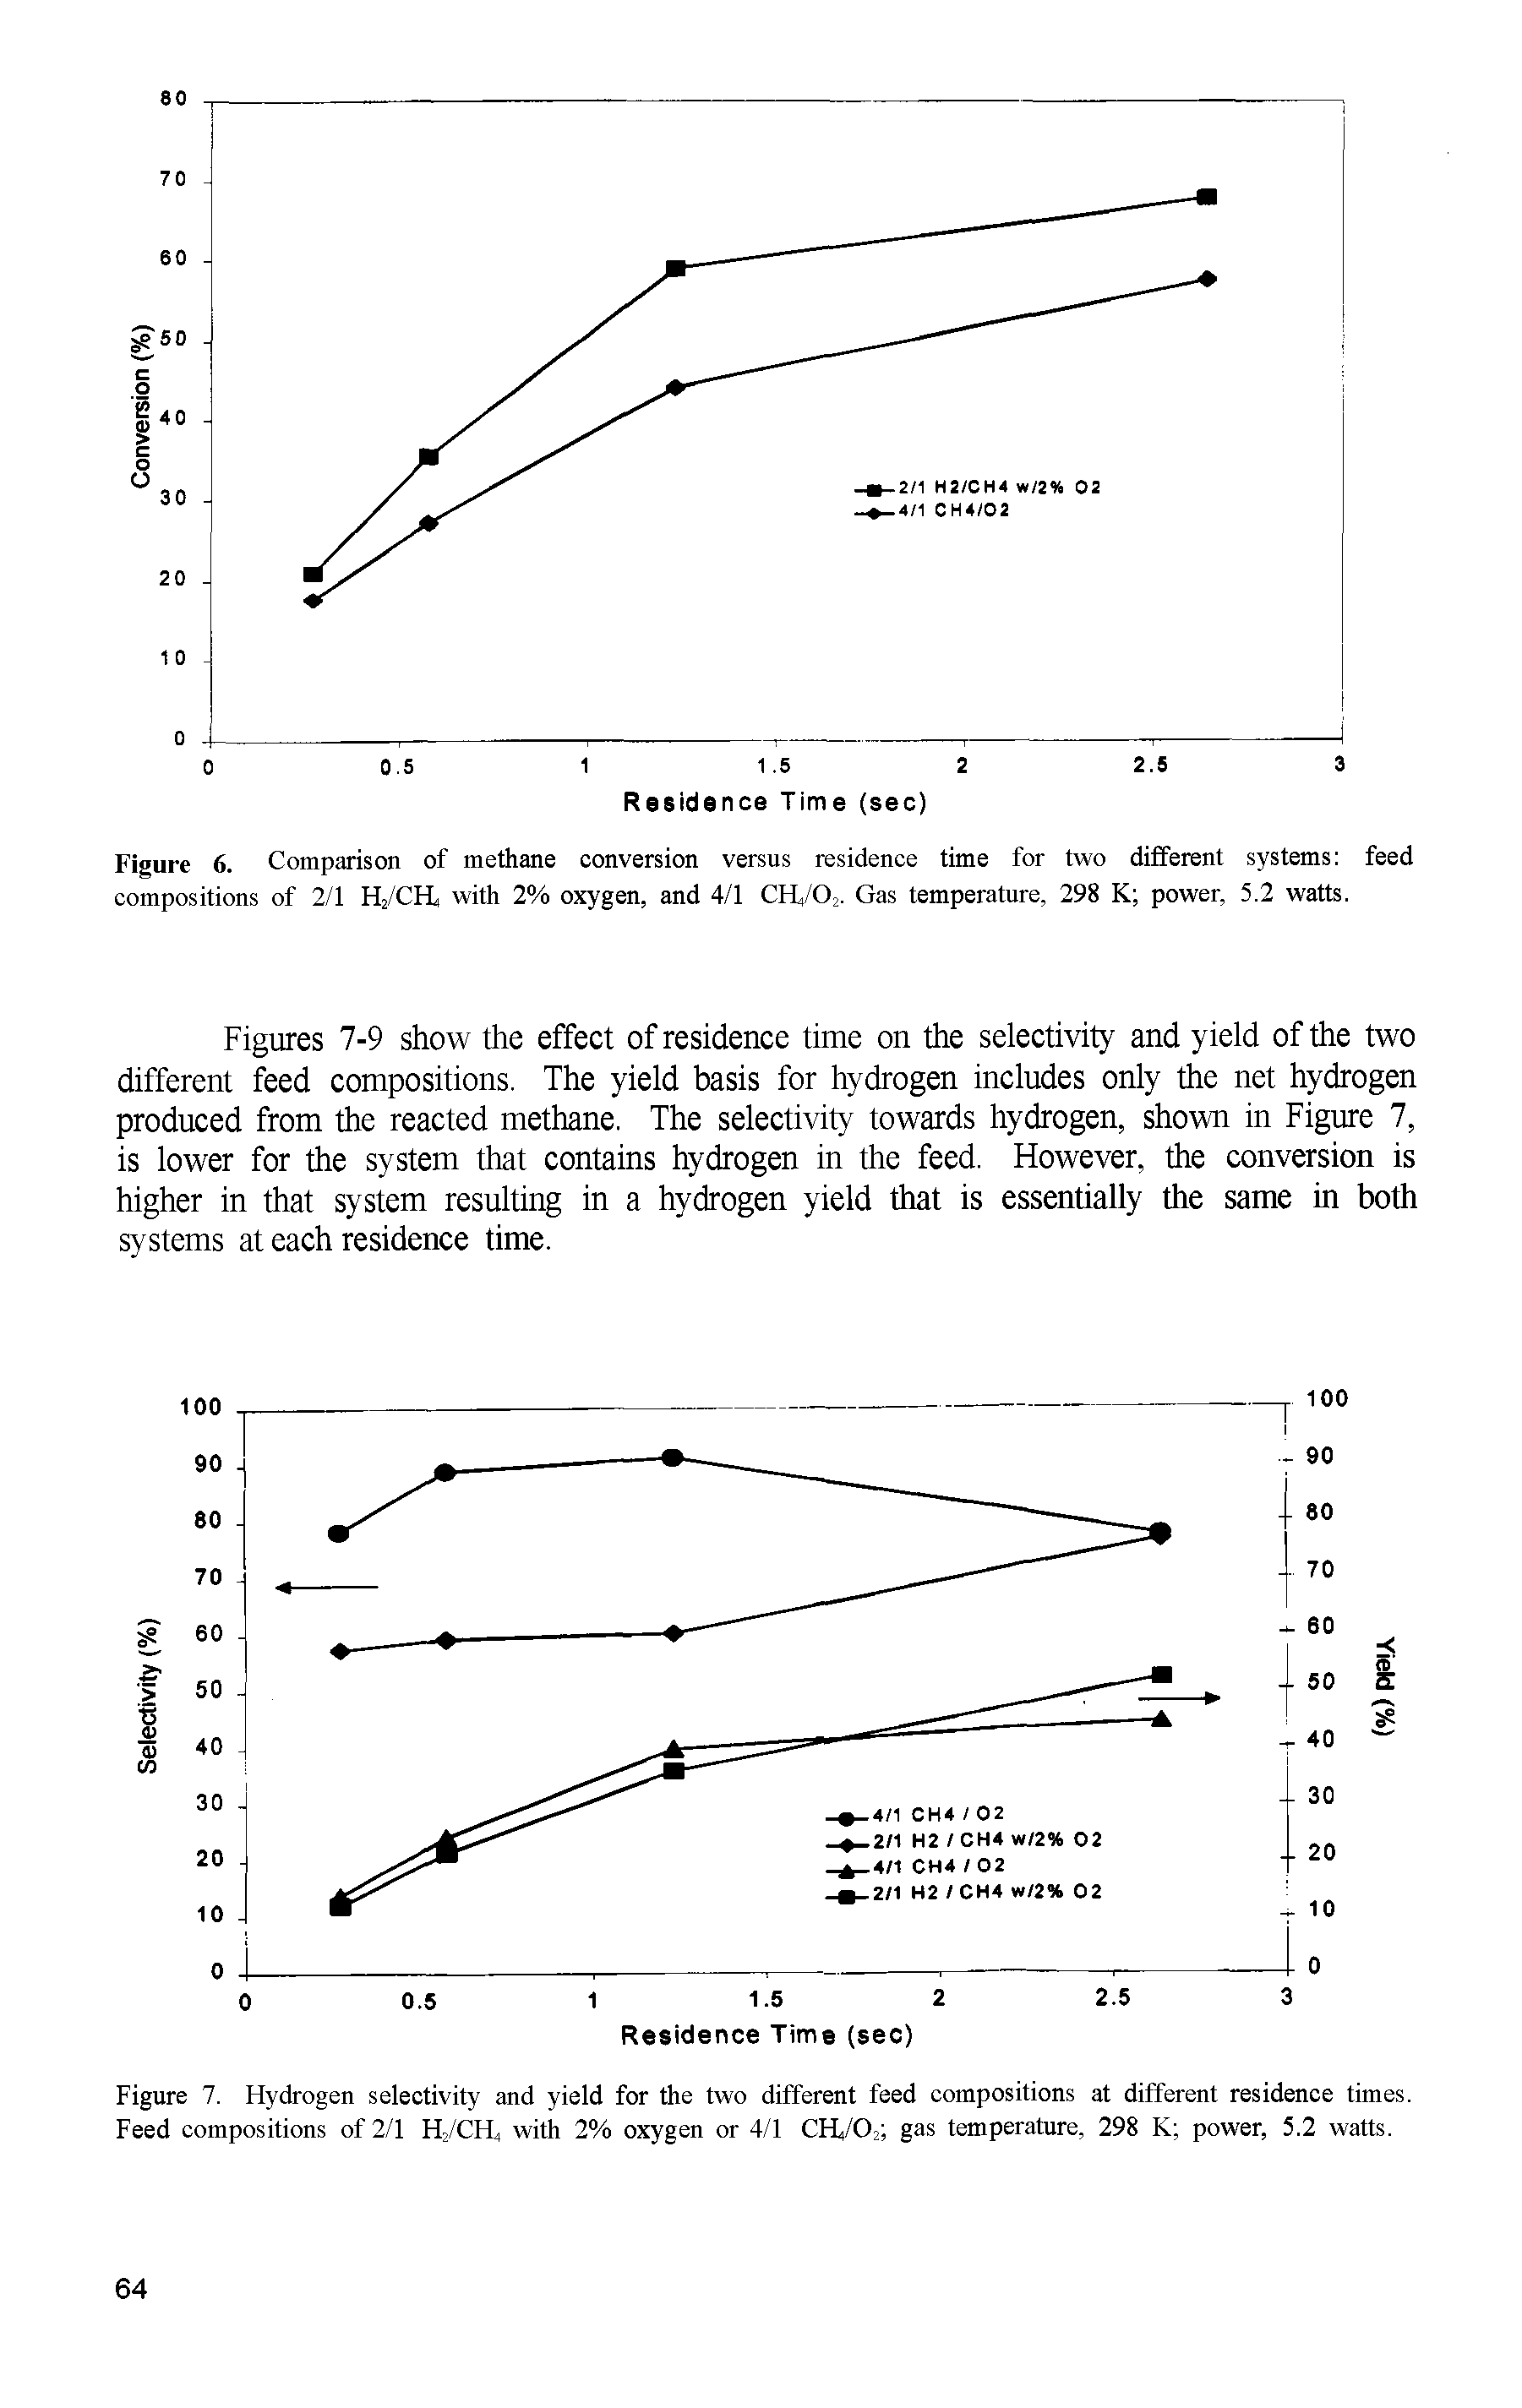 Figures 7-9 show the effect of residence time on the selectivity and yield of the two different feed compositions. The yield basis for hydrogen includes only the net hydrogen produced from the reacted methane. The selectivity towards hydrogen, shown in Figure 7, is lower for the system that contains hydrogen in the feed. However, the conversion is higher in that system resulting in a hydrogen yield that is essentially the same in both systems at each residence time.